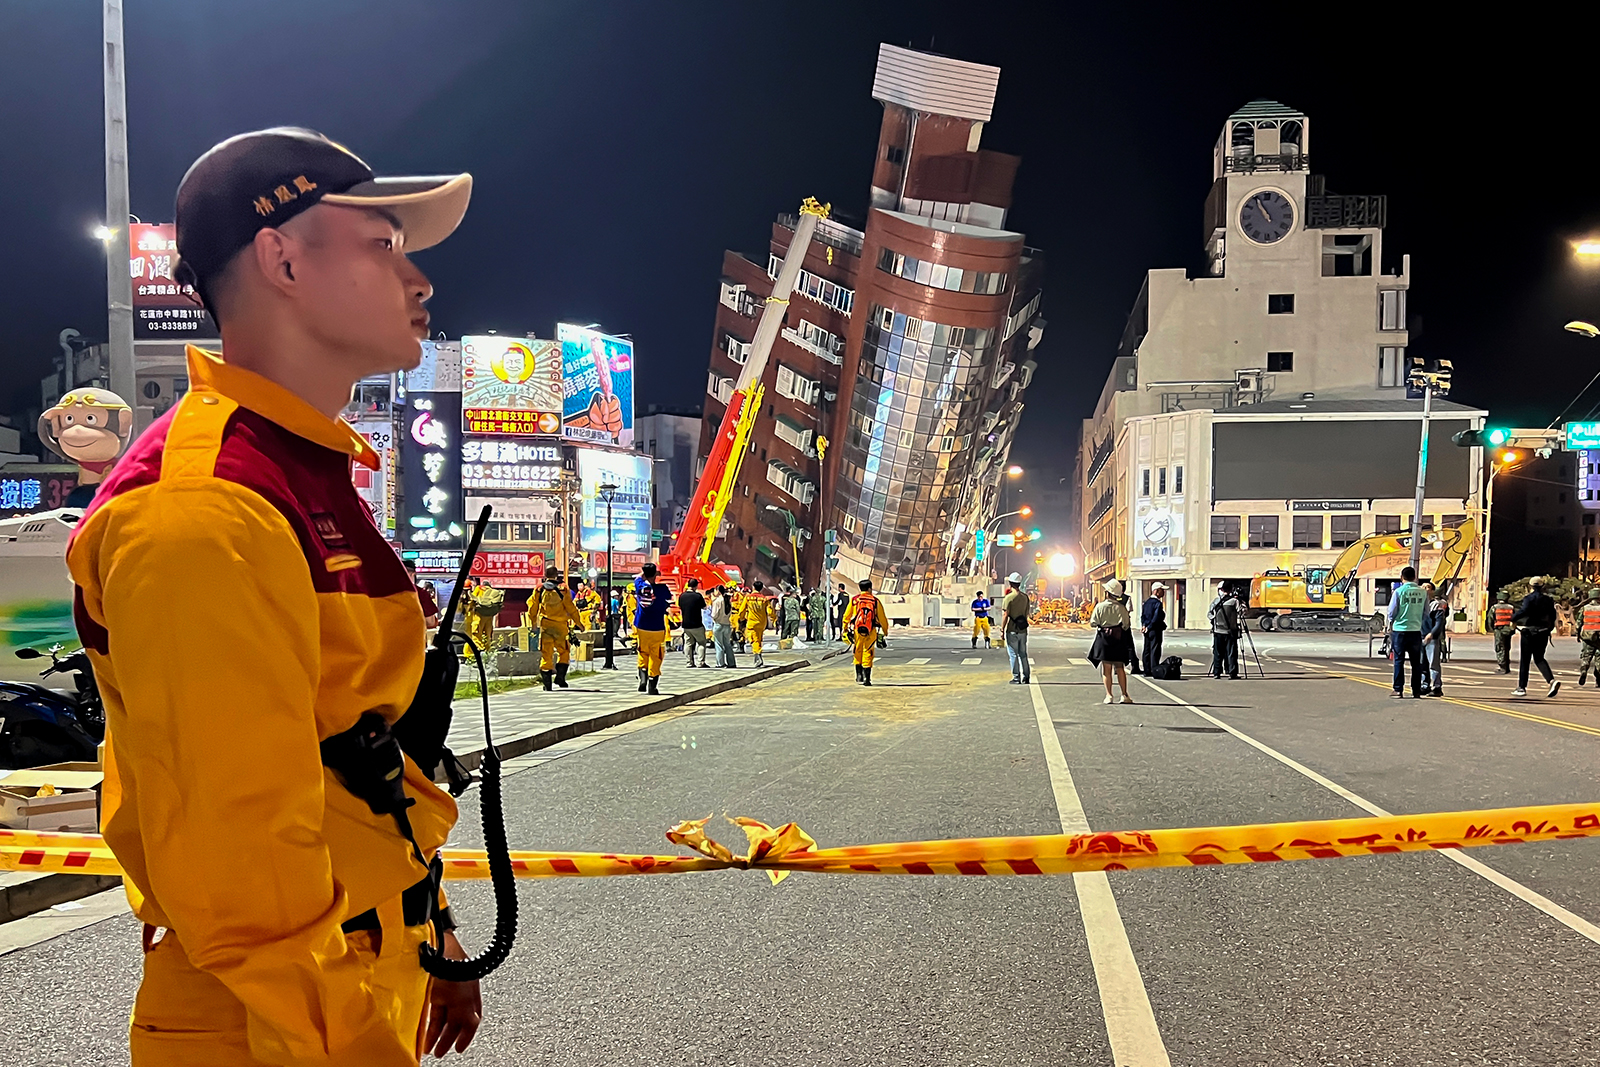 A rescue worker stands near the cordoned off site of a leaning building in the aftermath of an earthquake in Hualien, eastern Taiwan on Wednesday, April 3.